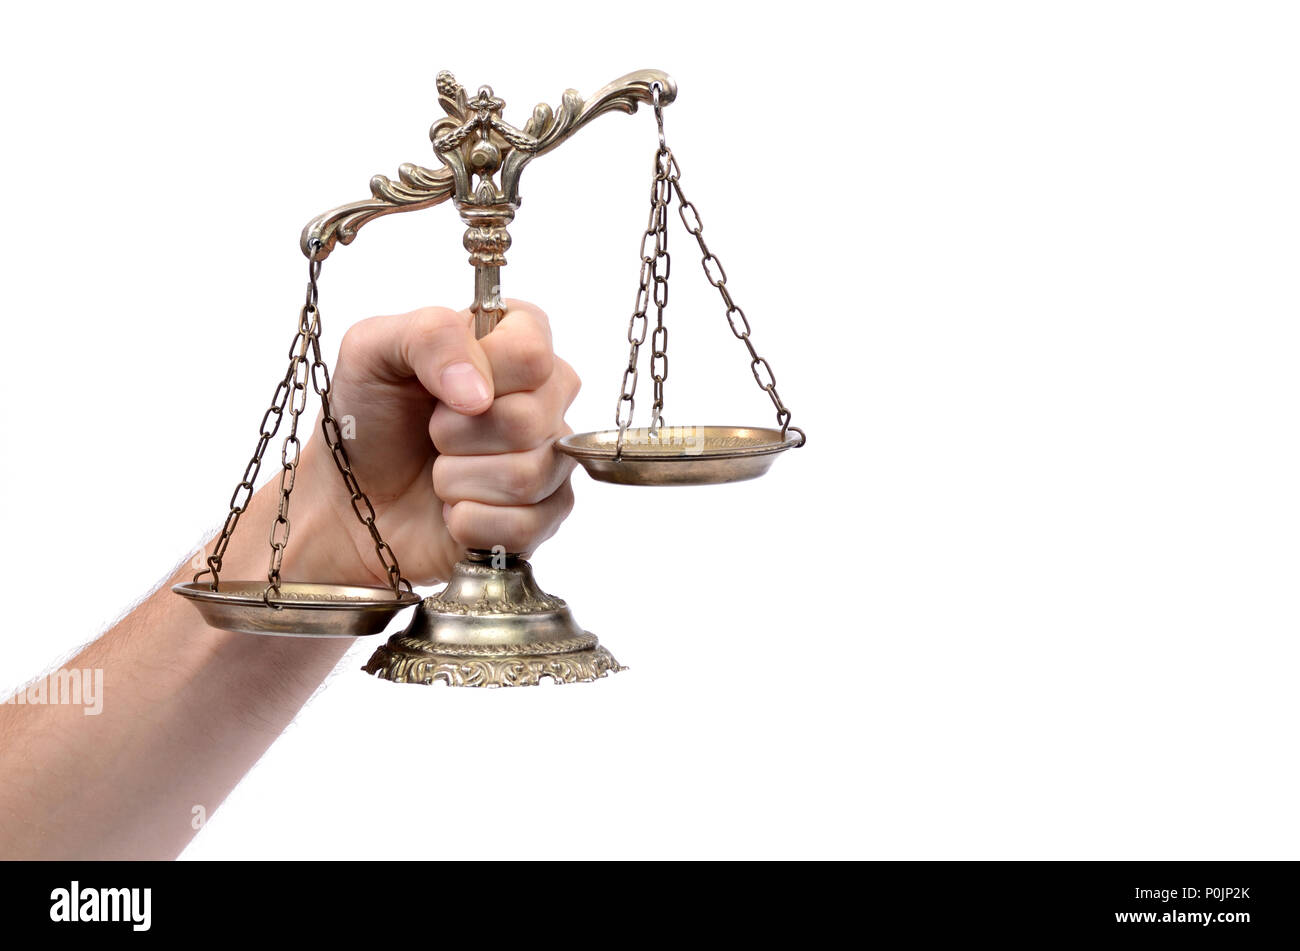 Holding Decorative Scales of Justice,  isolated, law and justice concept Stock Photo